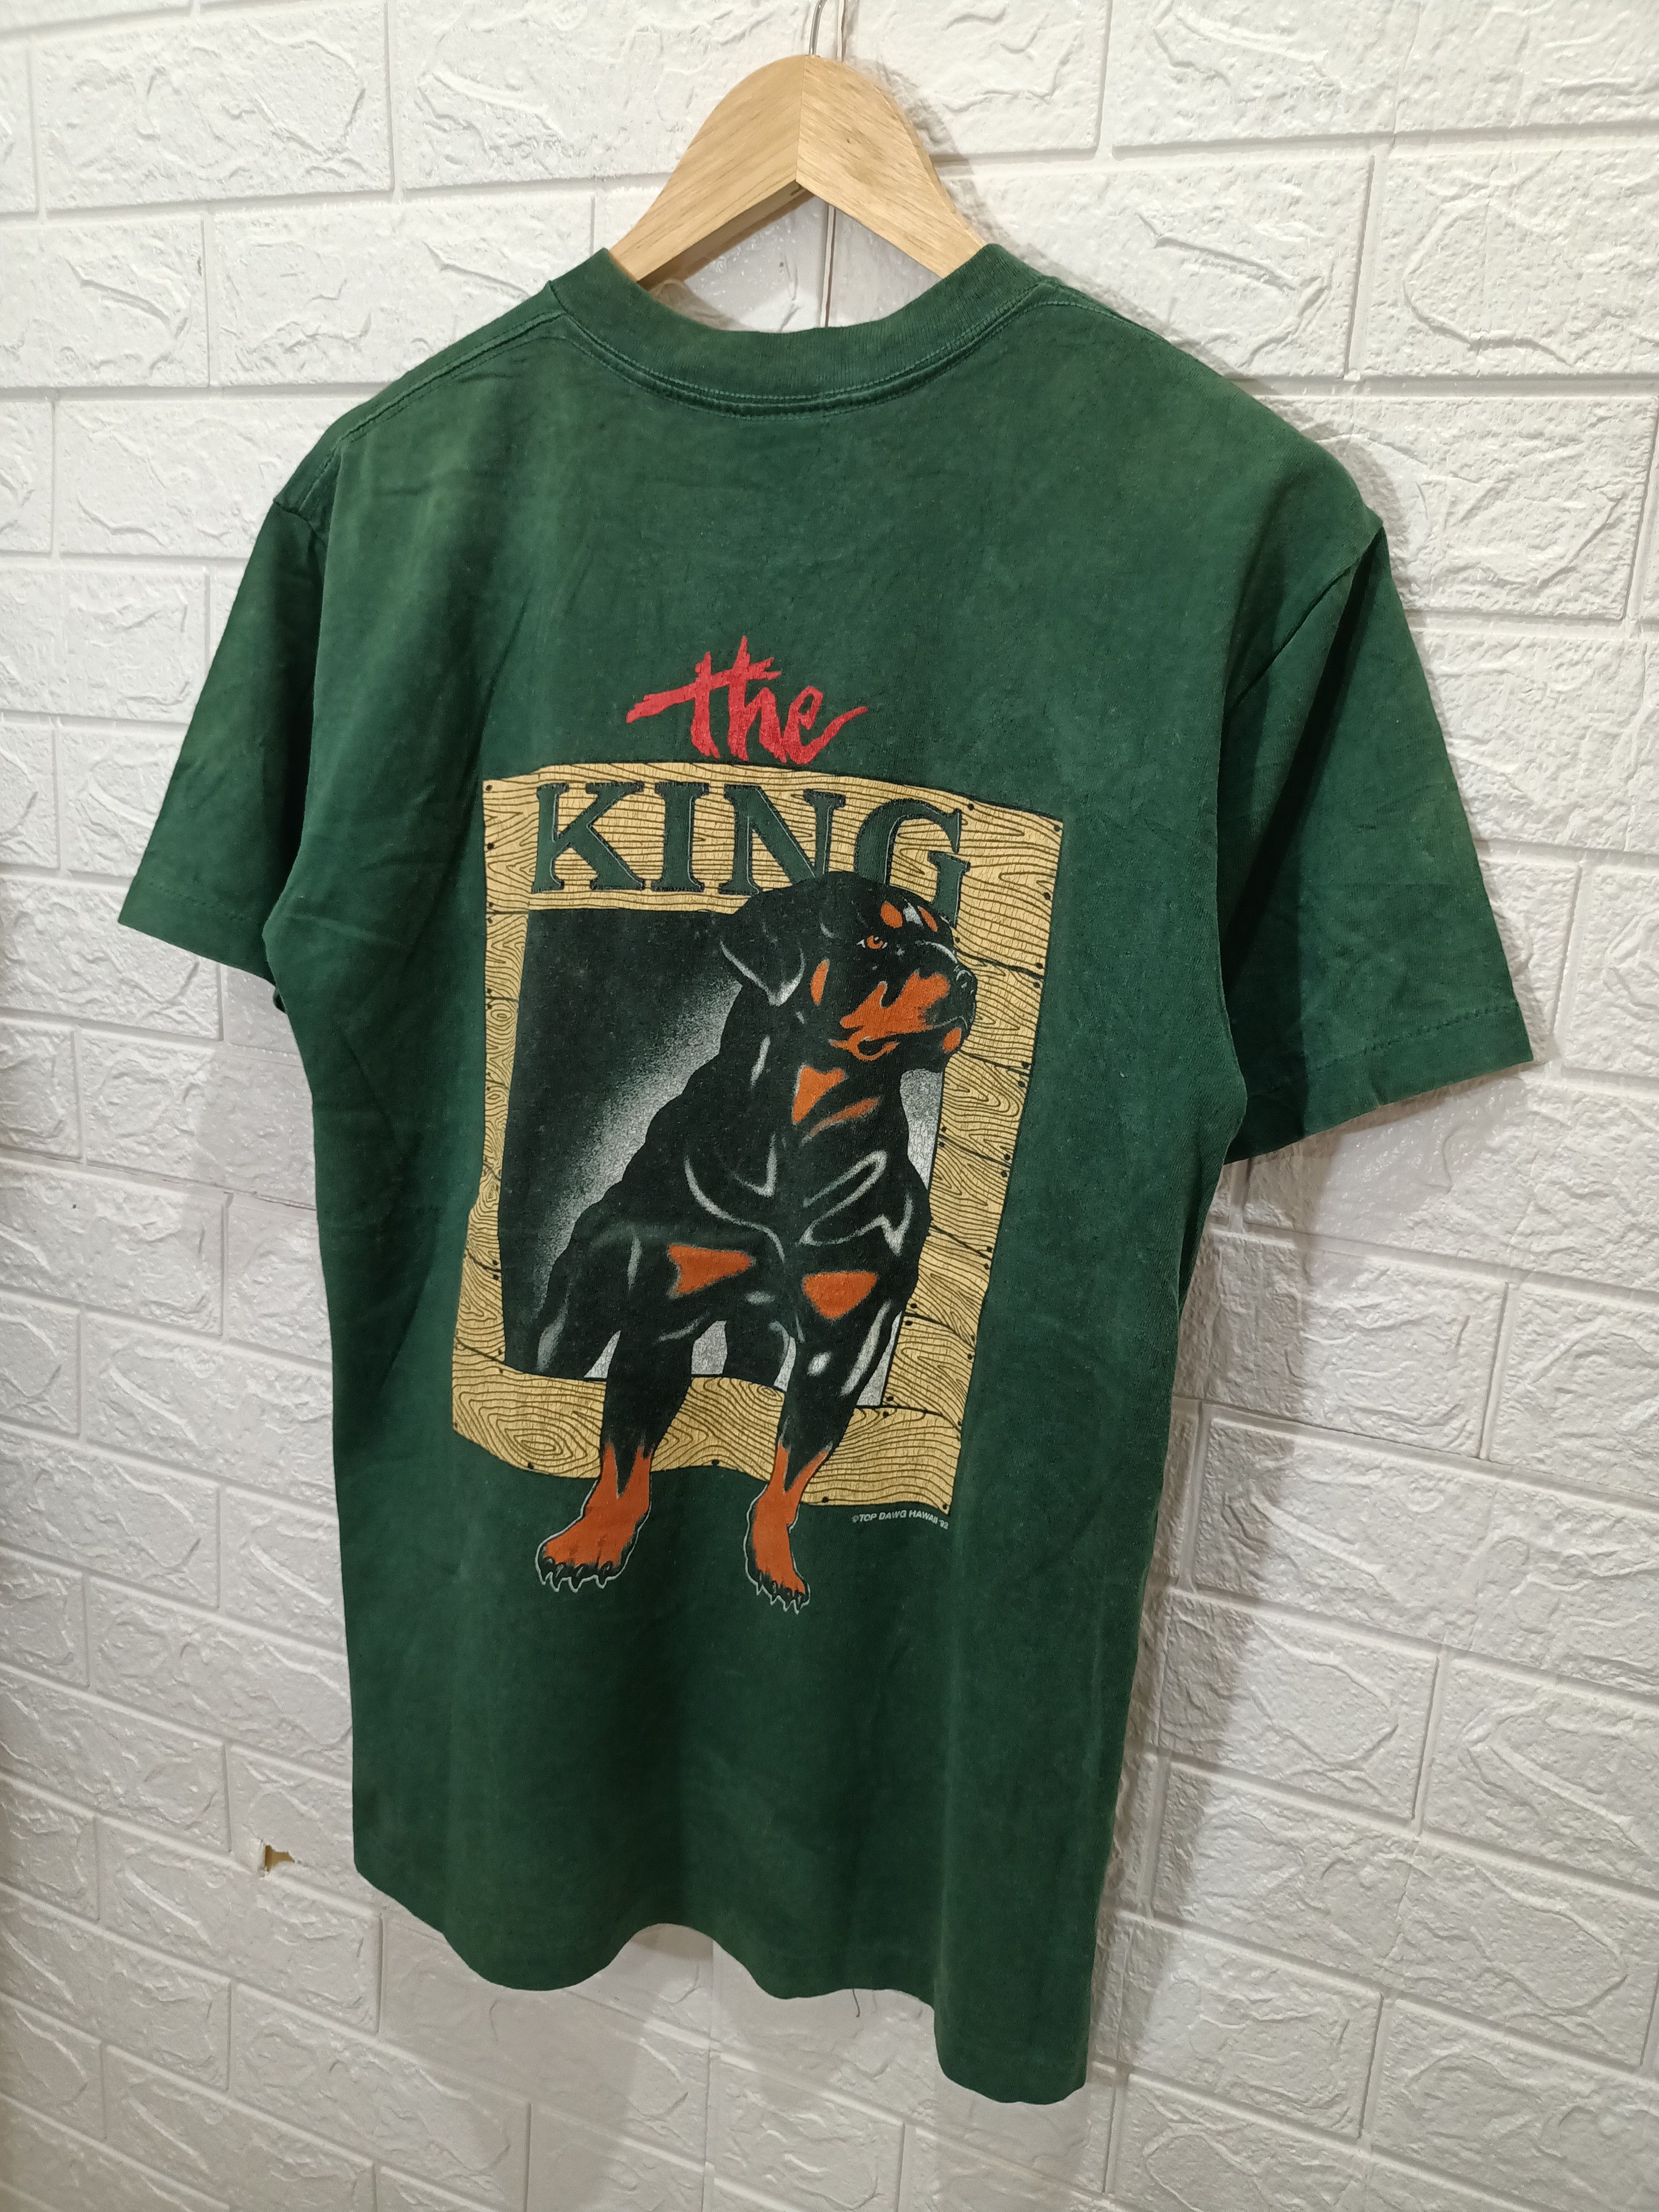 Rare Vintage 1992 The King Top Dawg Hawaii Graphic Tees - 4